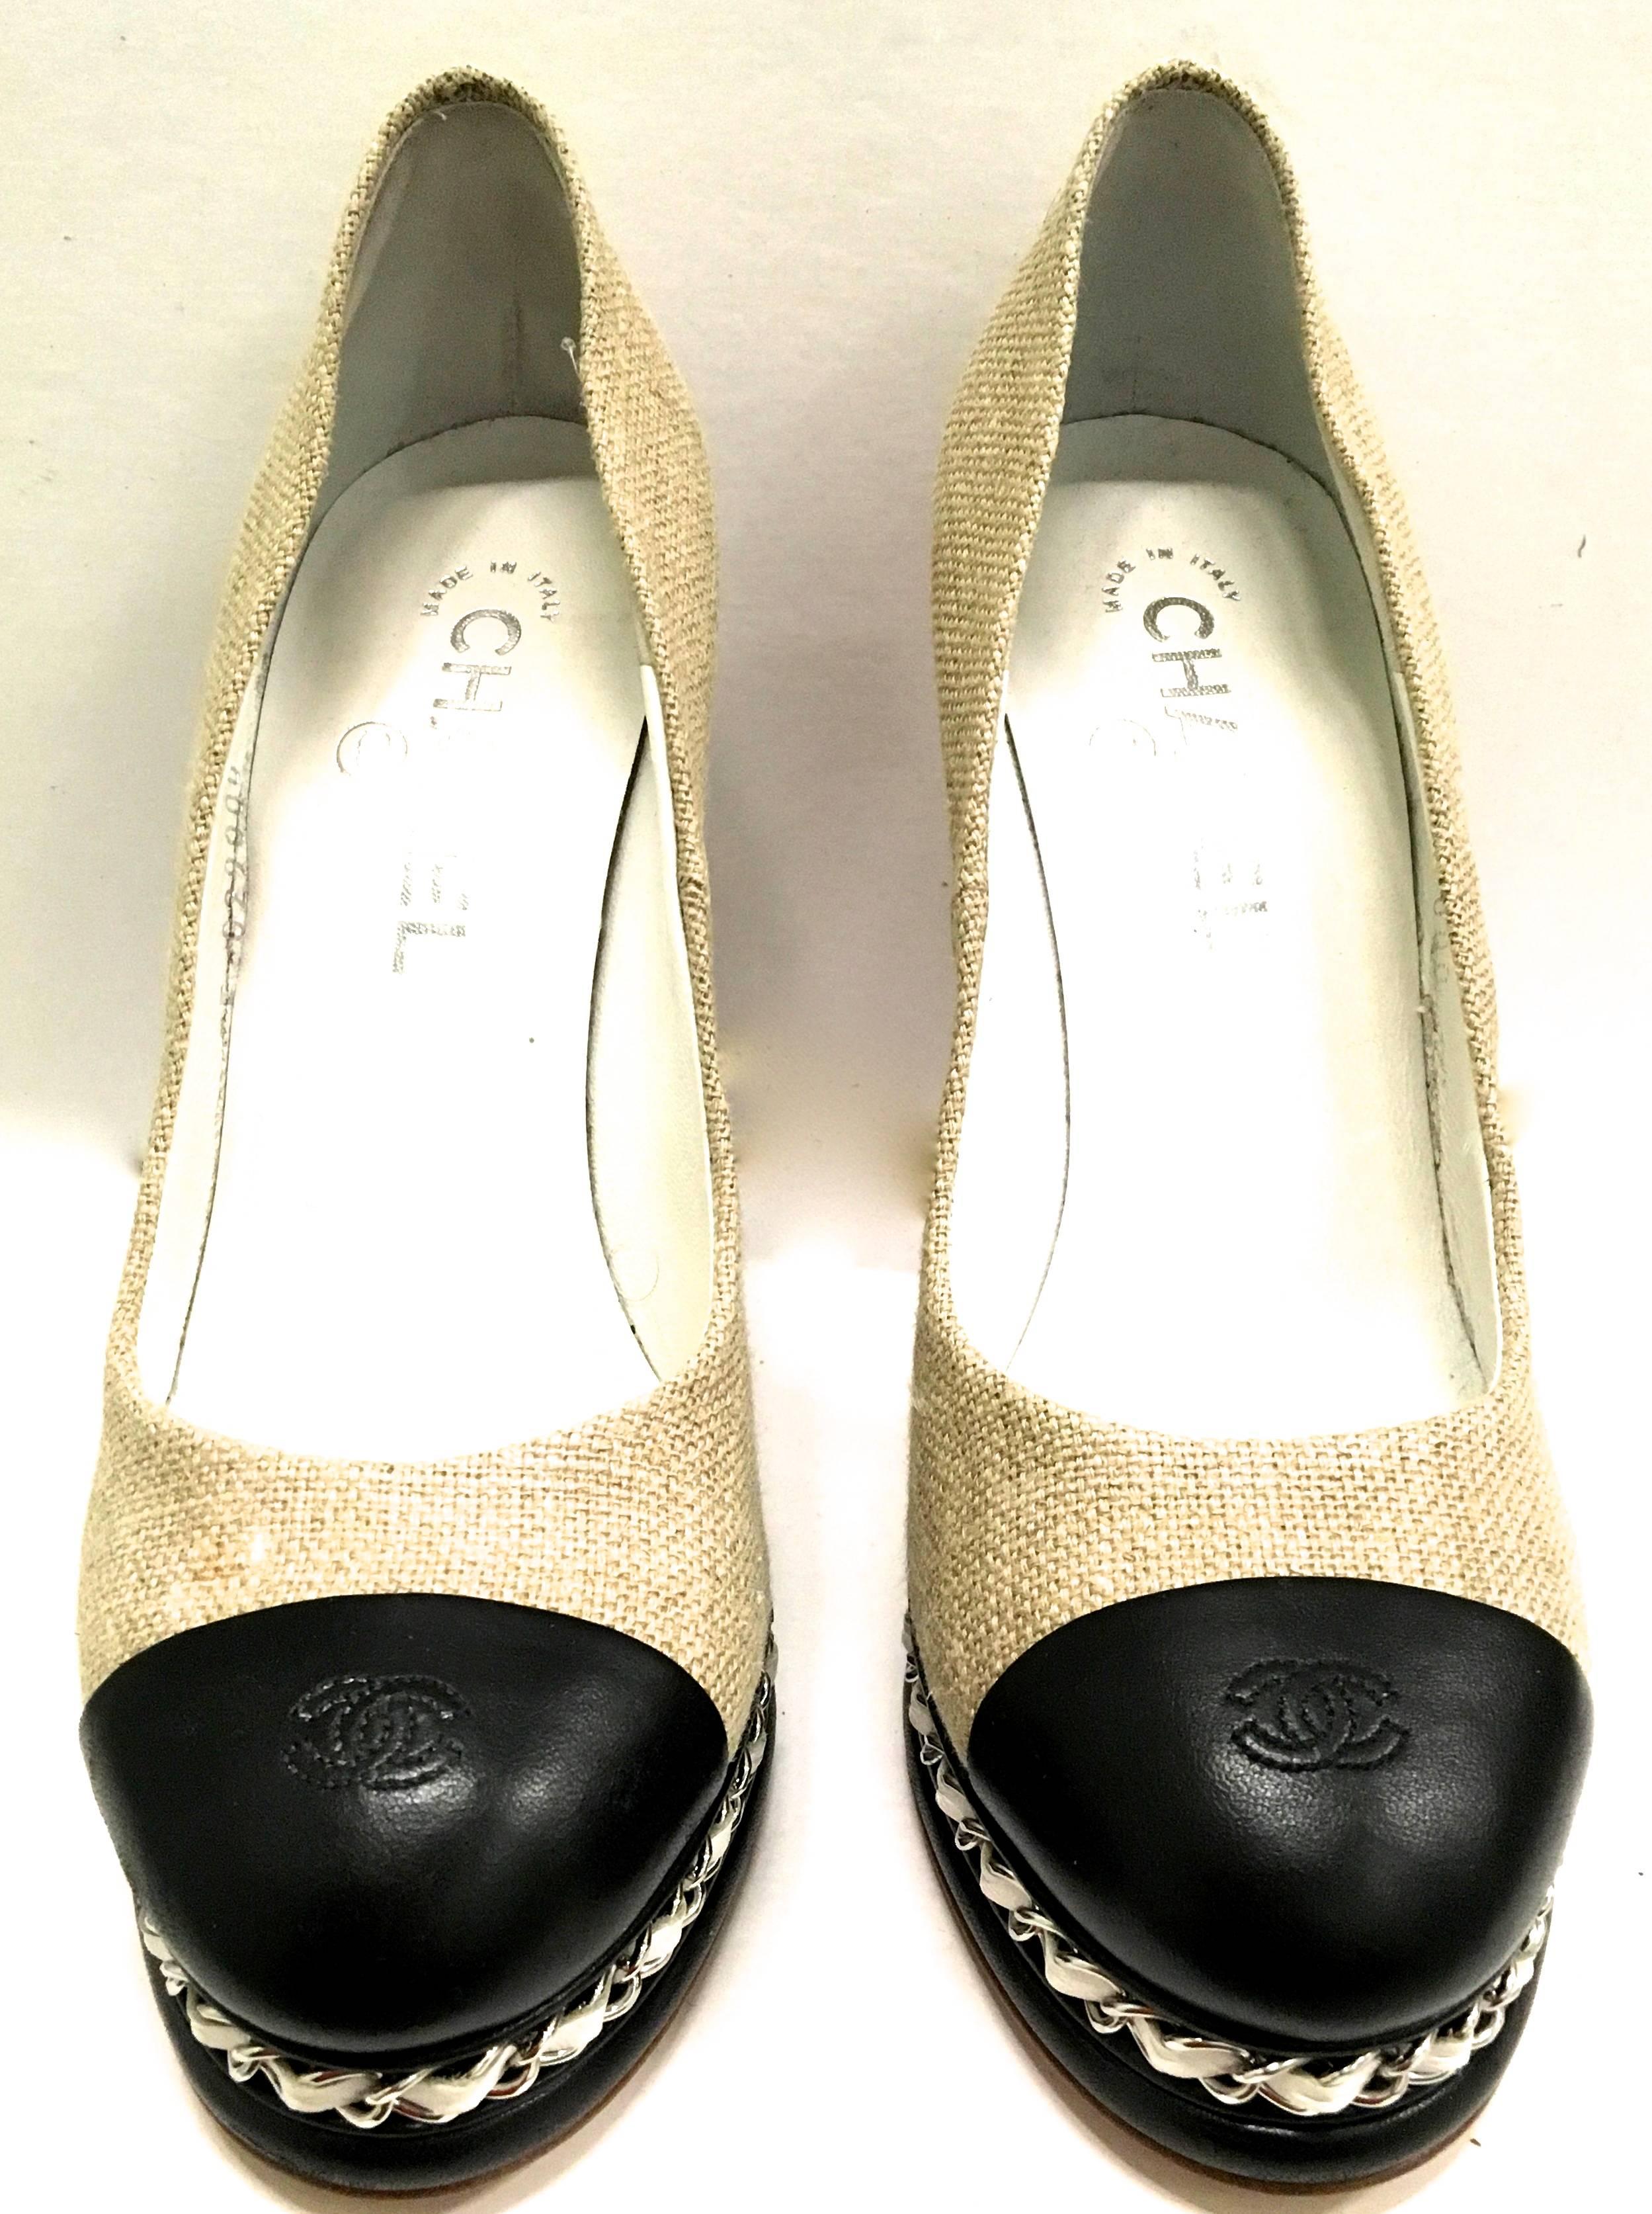 New Chanel Shoes - 8.5 - Platform Heels - Pump w/ Iconic Chain For Sale 2